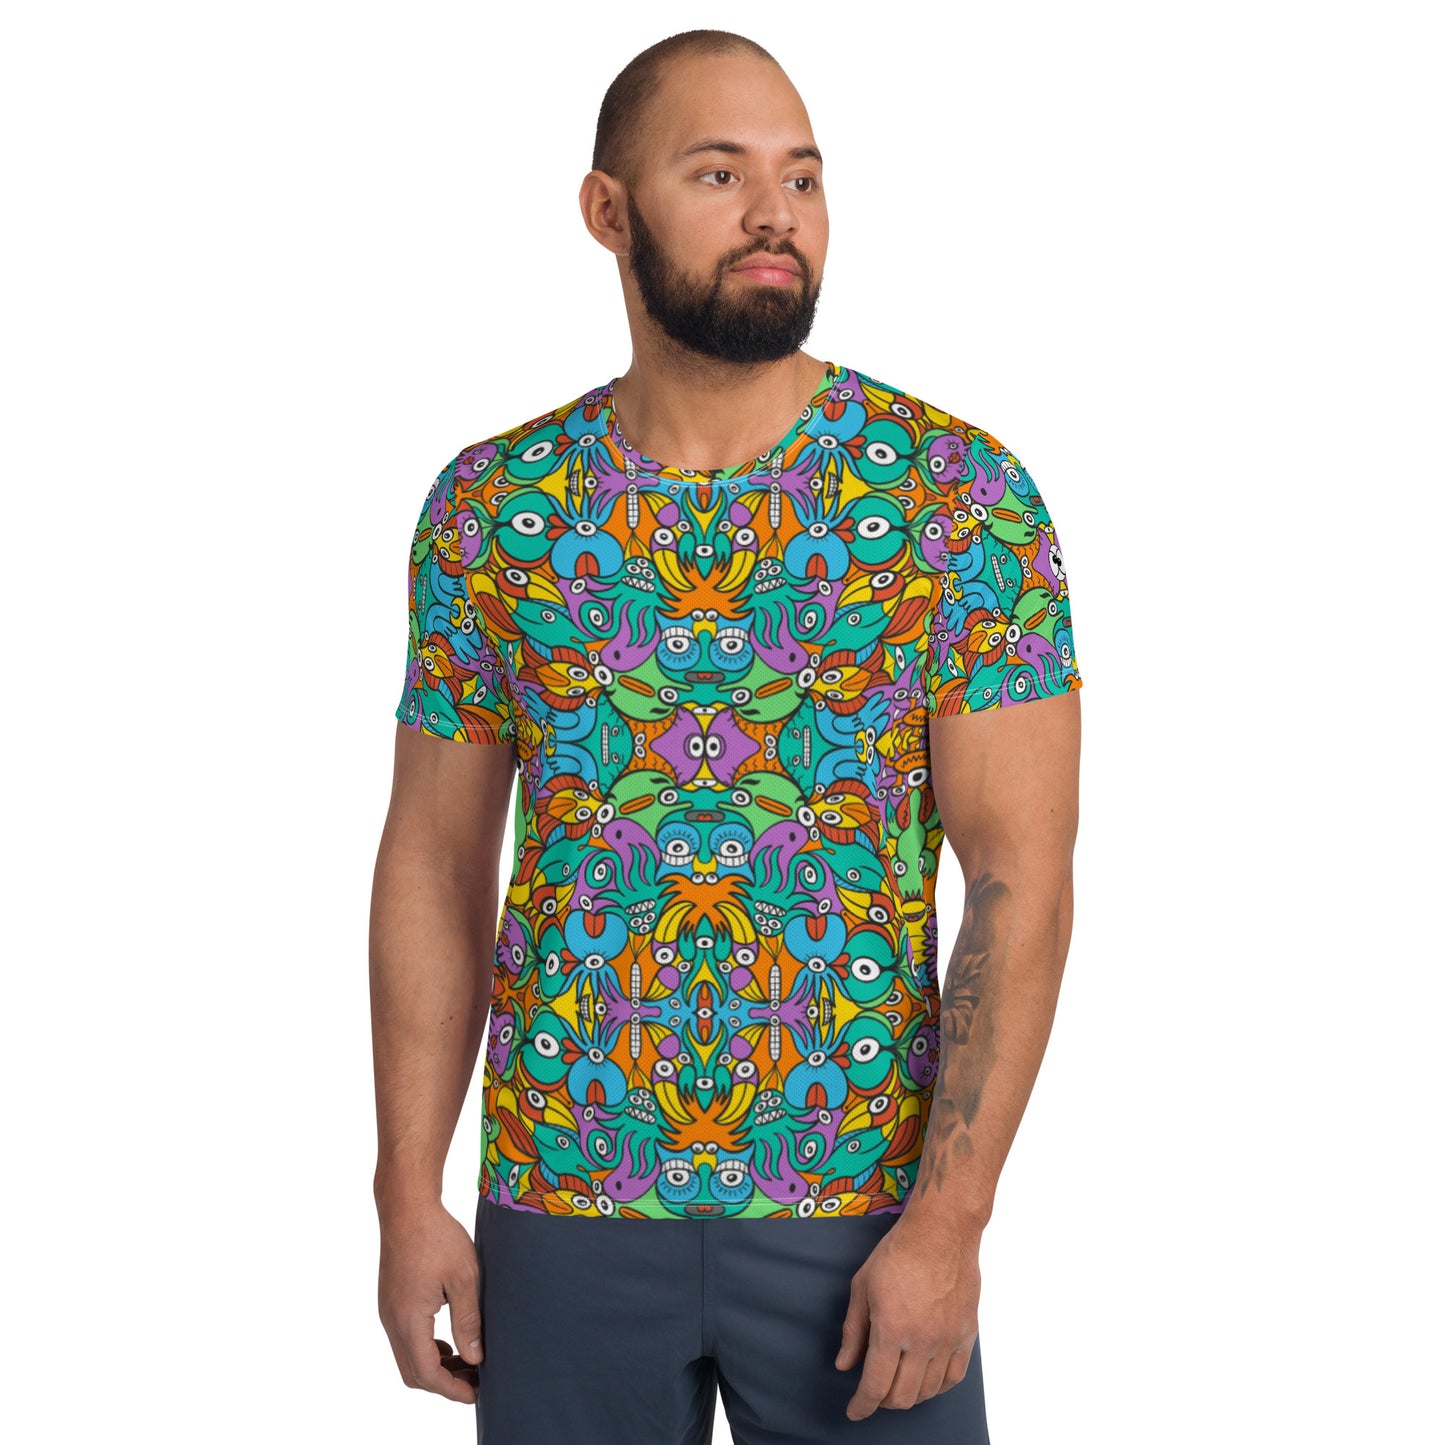 Fantastic doodle world full of weird creatures All-Over Print Men's Athletic T-shirt. Front view